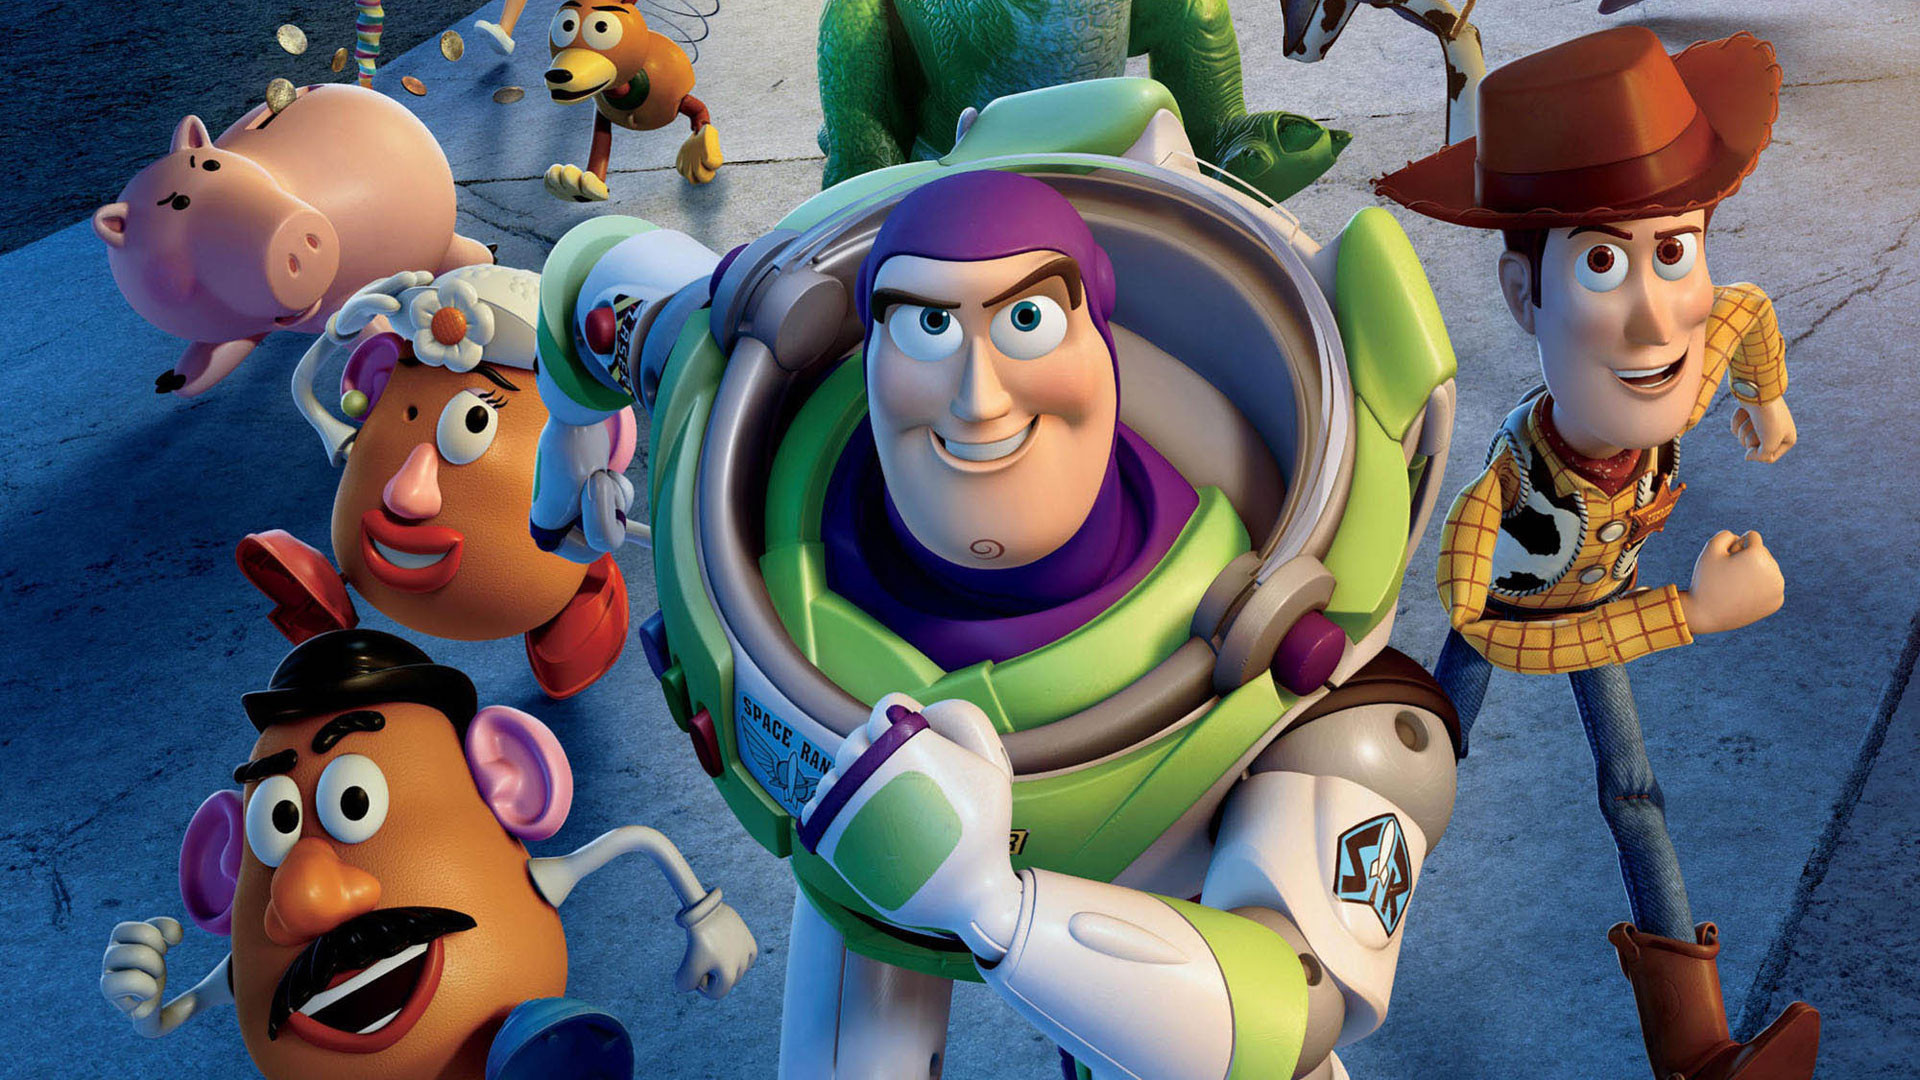 download toy story full movie free